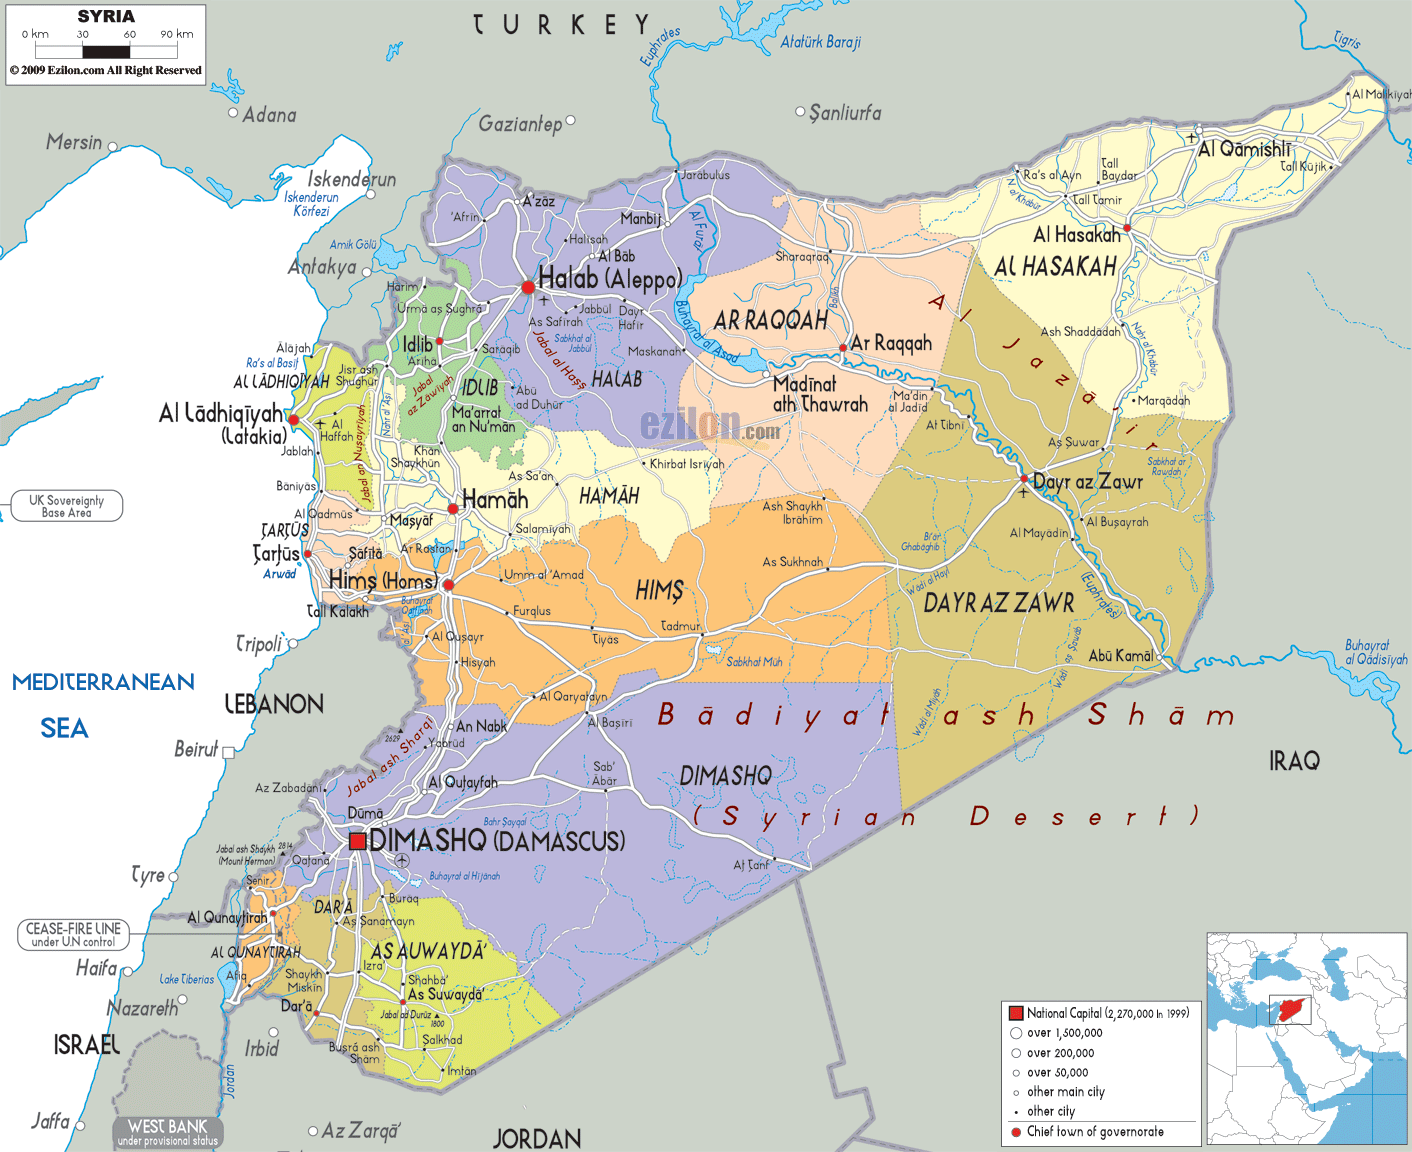 Political map of Syria